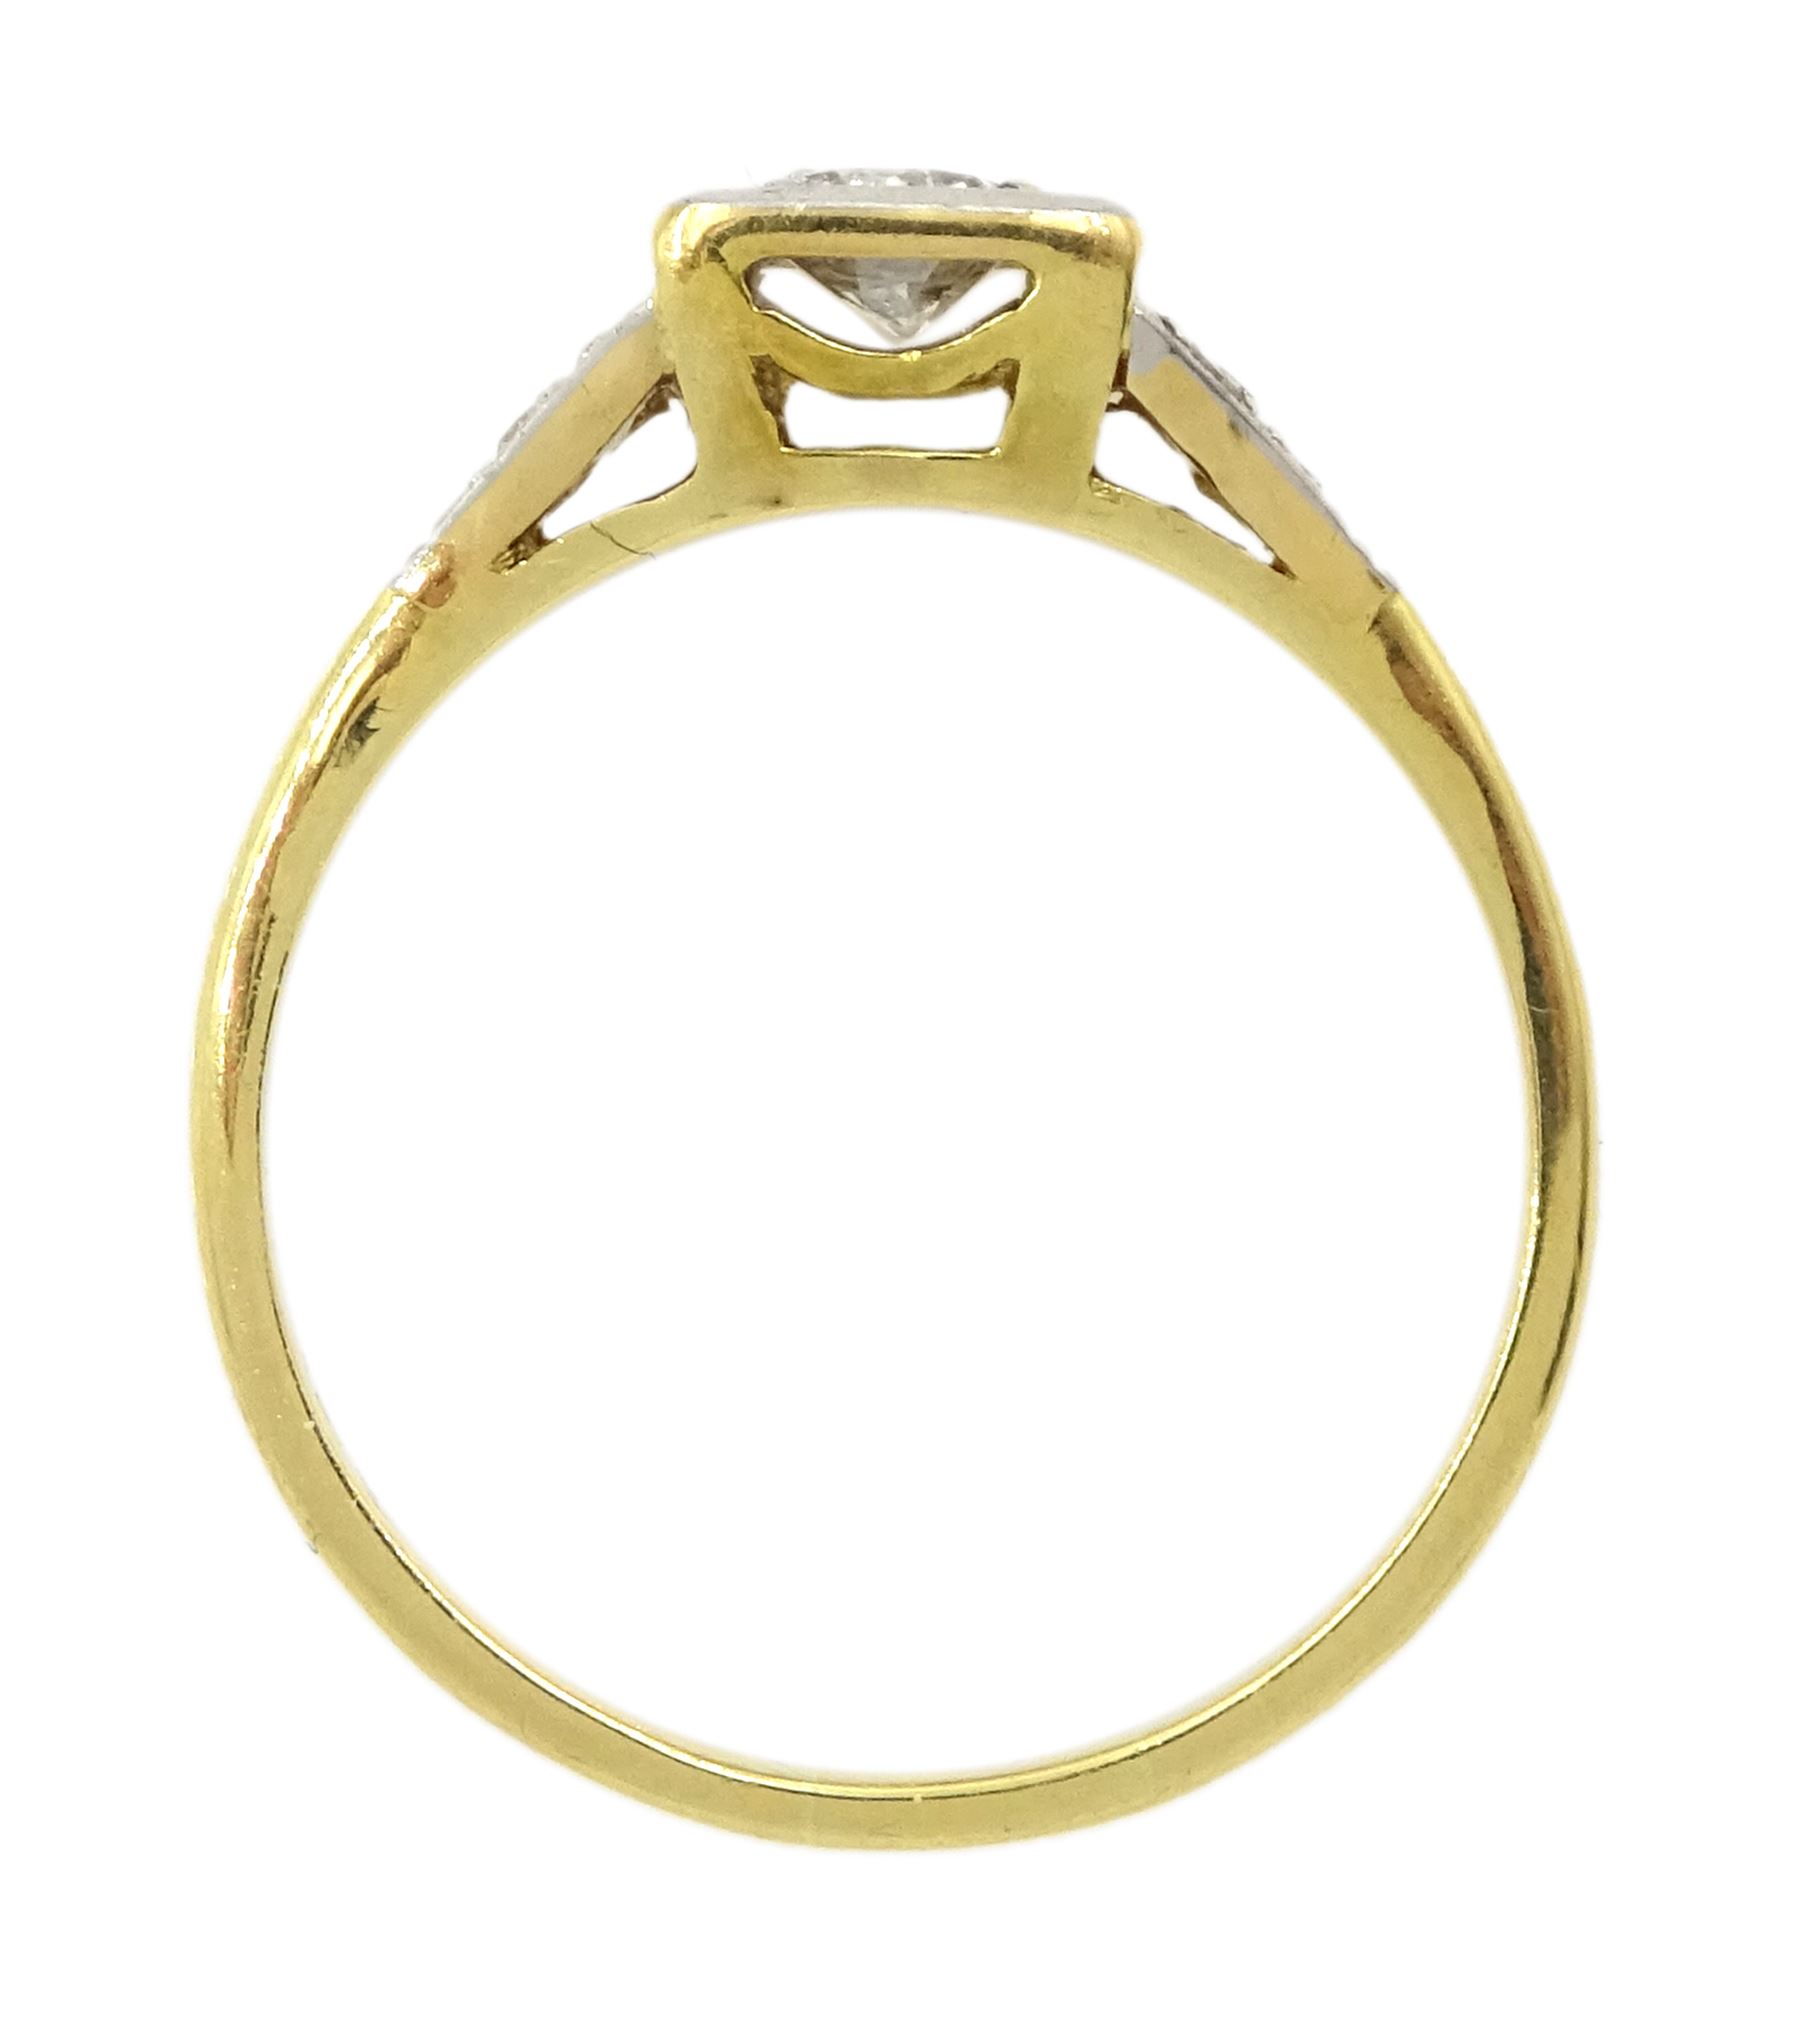 Early-mid 20th century 18ct gold single stone old cut diamond ring - Image 4 of 4